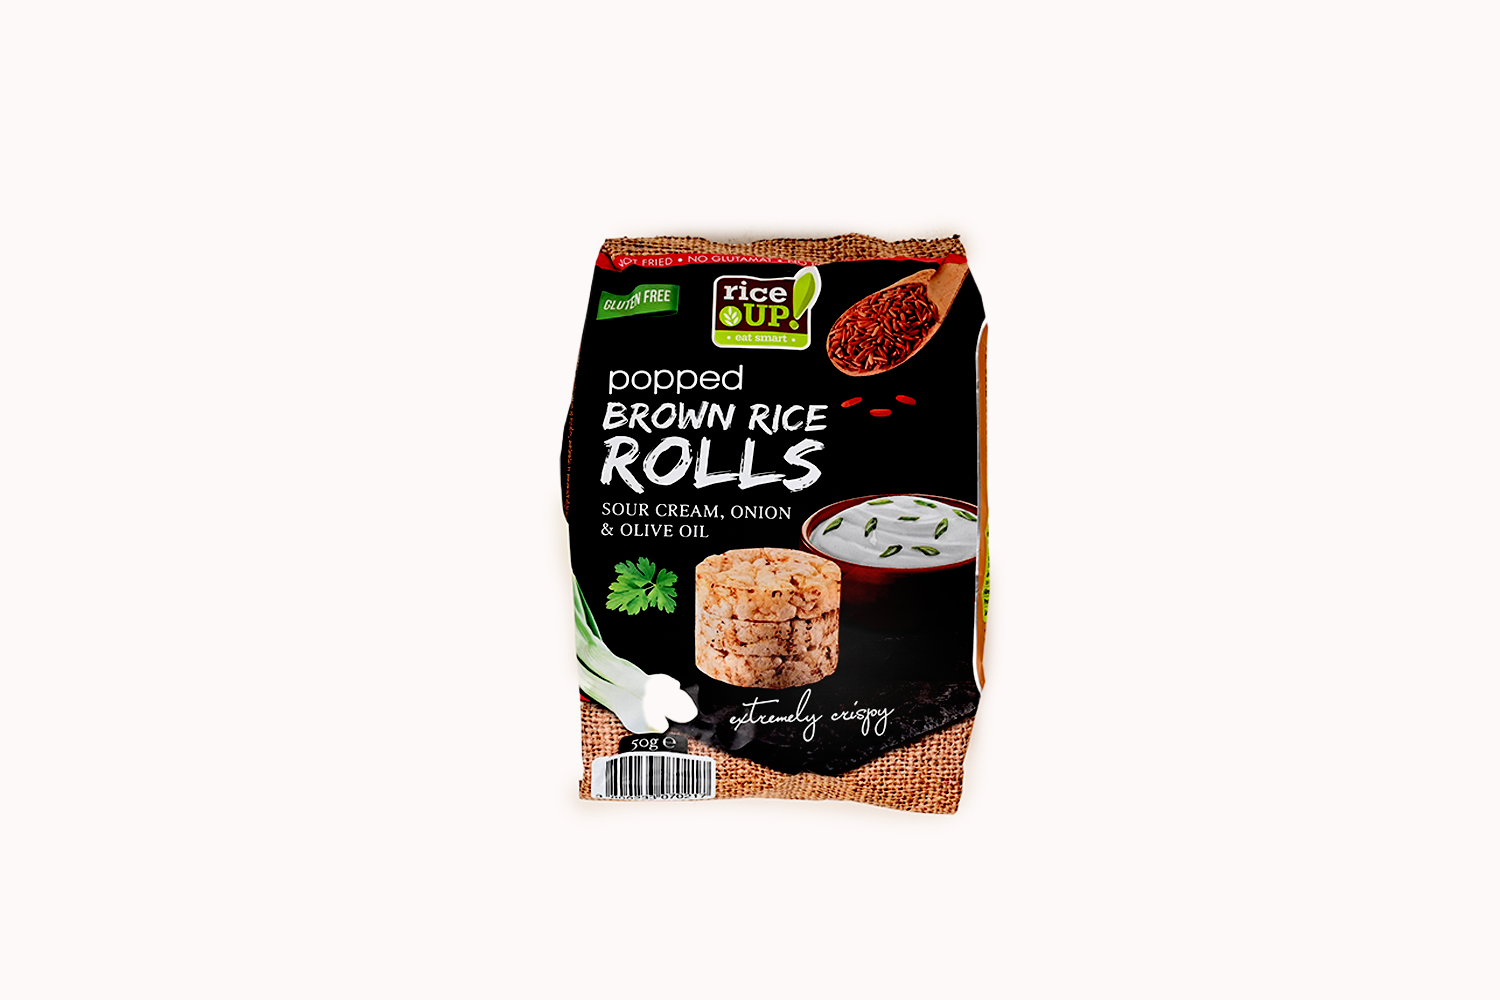 RiceUP! Sour Cream and Onion Brown Rice Rolls